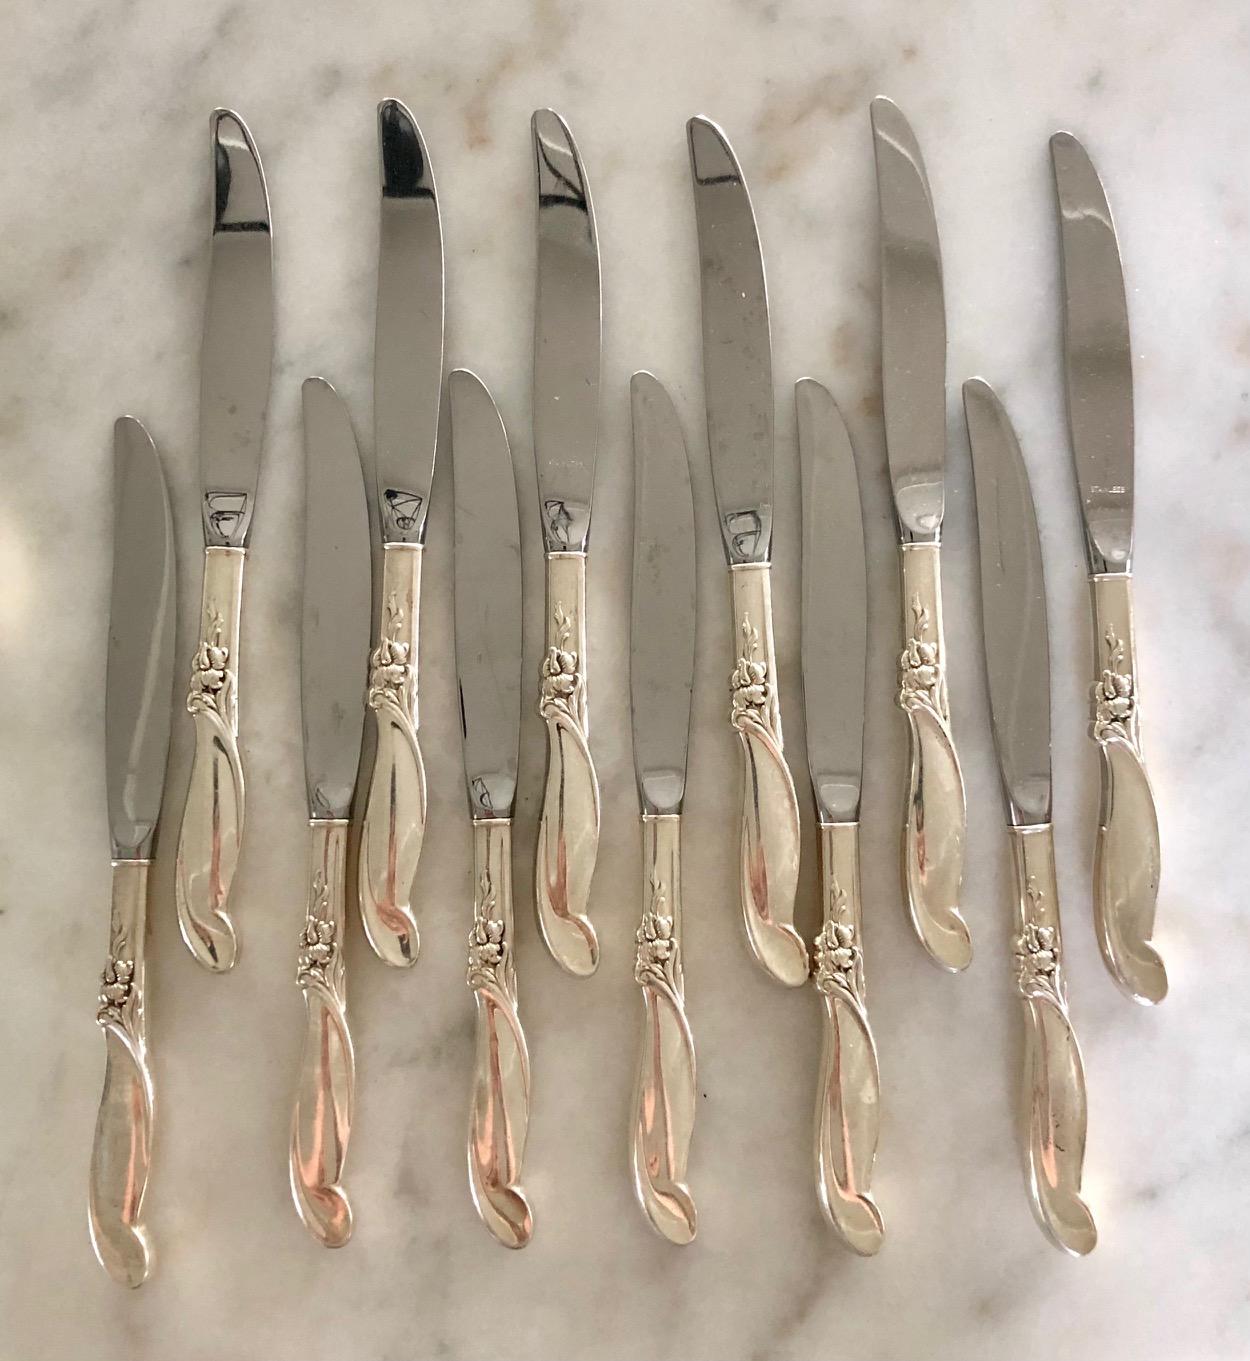 Elegant Silver Melody by International sterling silver flatware set of 63 pieces. This set includes:
12 knives 9.25”
12 forks 7.25”
12 salad forks 6.5”
12 teaspoons 6”
12 place soup spoons 6.75”
1 Butter Spreader 6 3/8”
1 Pie Server 10.75”
1